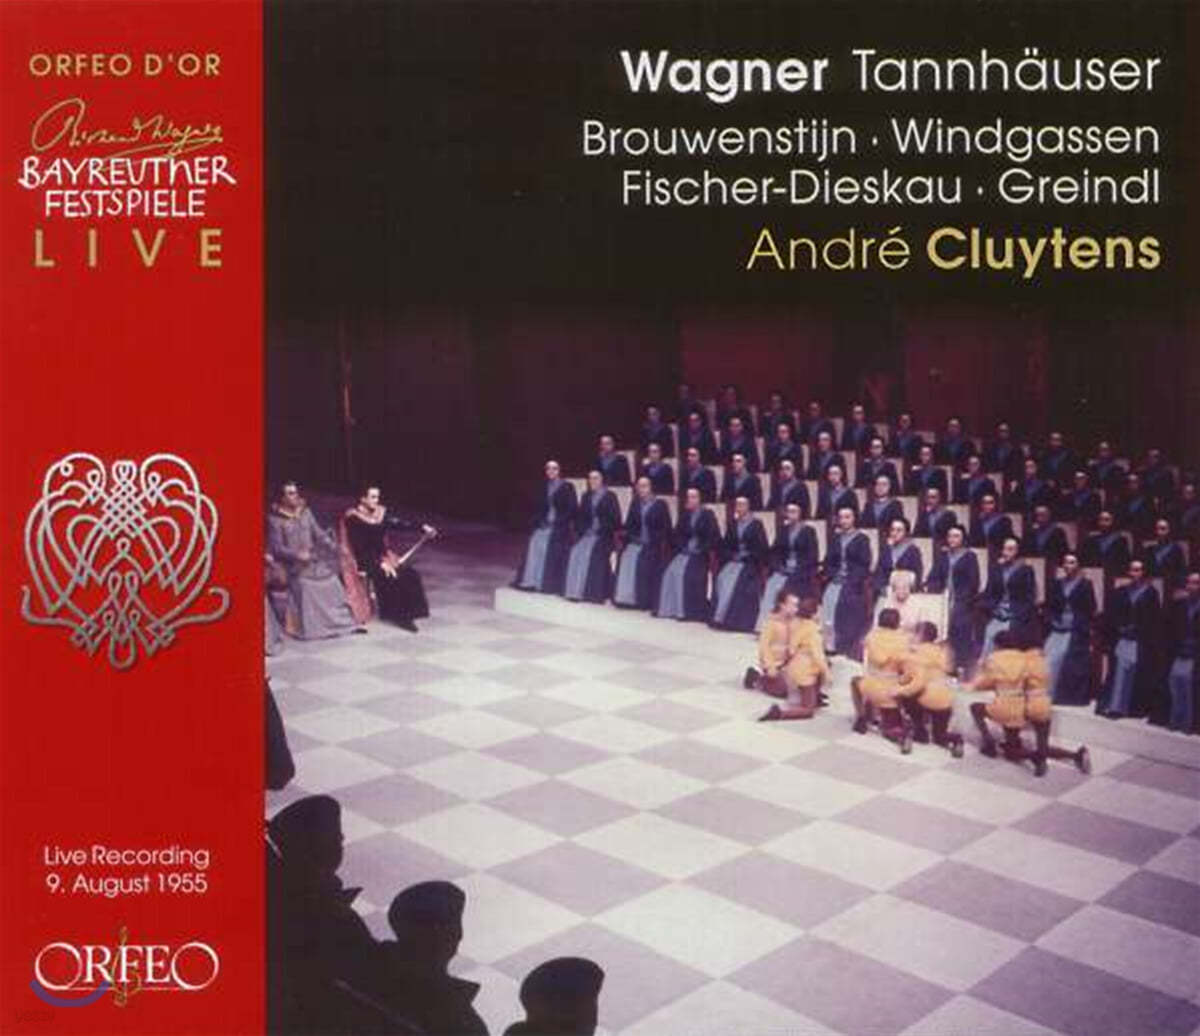 Andre Cluytens 바그너: 탄호이저 (Wagner : Tannhauser - Bayreuther FestspieleㆍCluytens) 